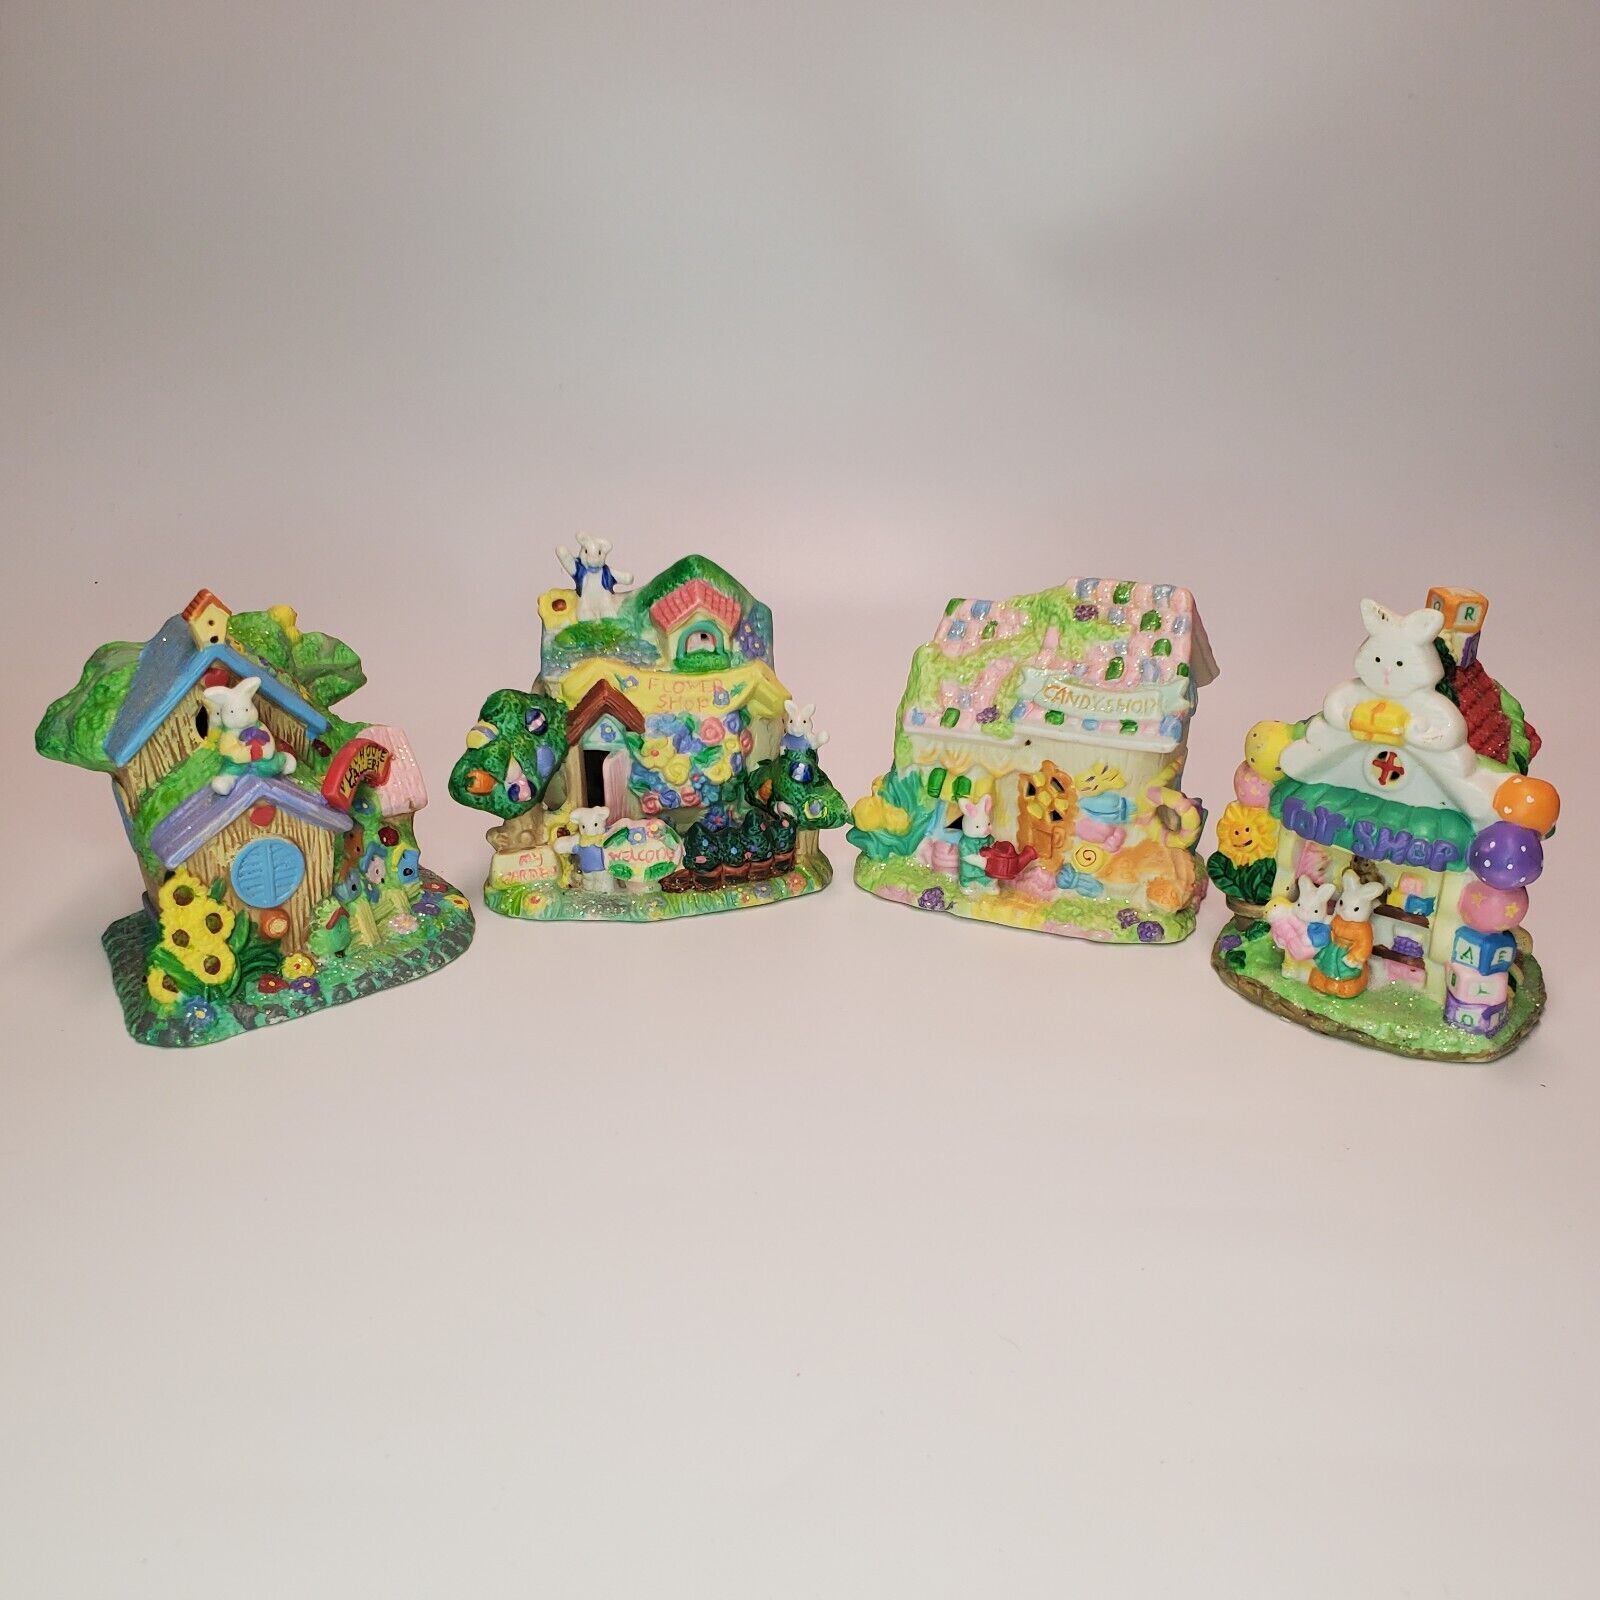 2003 Hoppy Hollow 4 pc. Lot of Easter Village Houses Candy Toy Birdhouse Flower